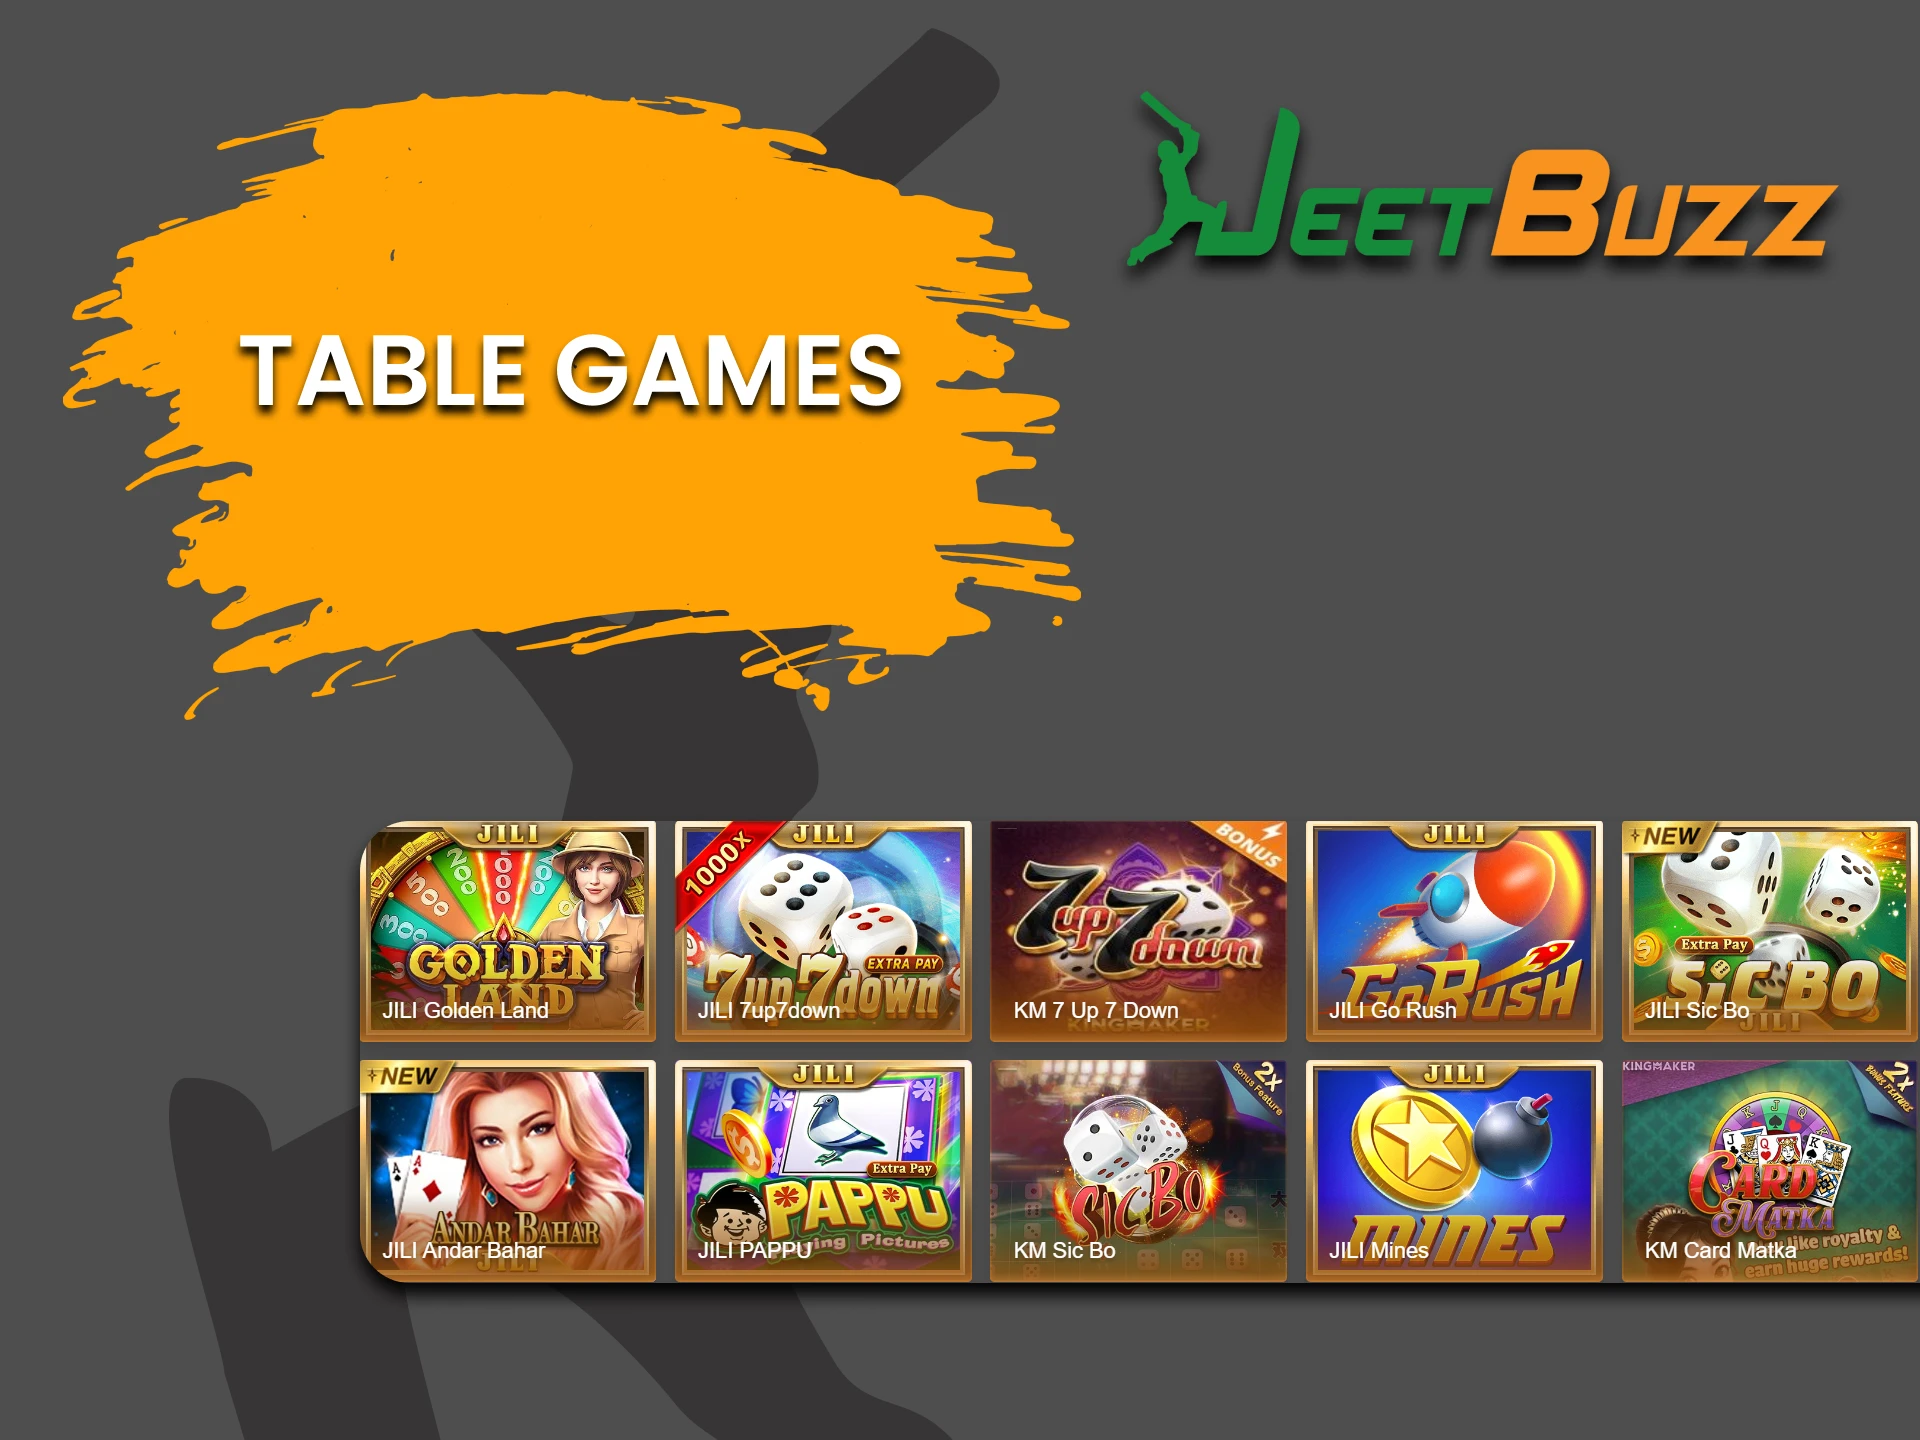 Go to the Table Games section for casino games on JeetBuzz.